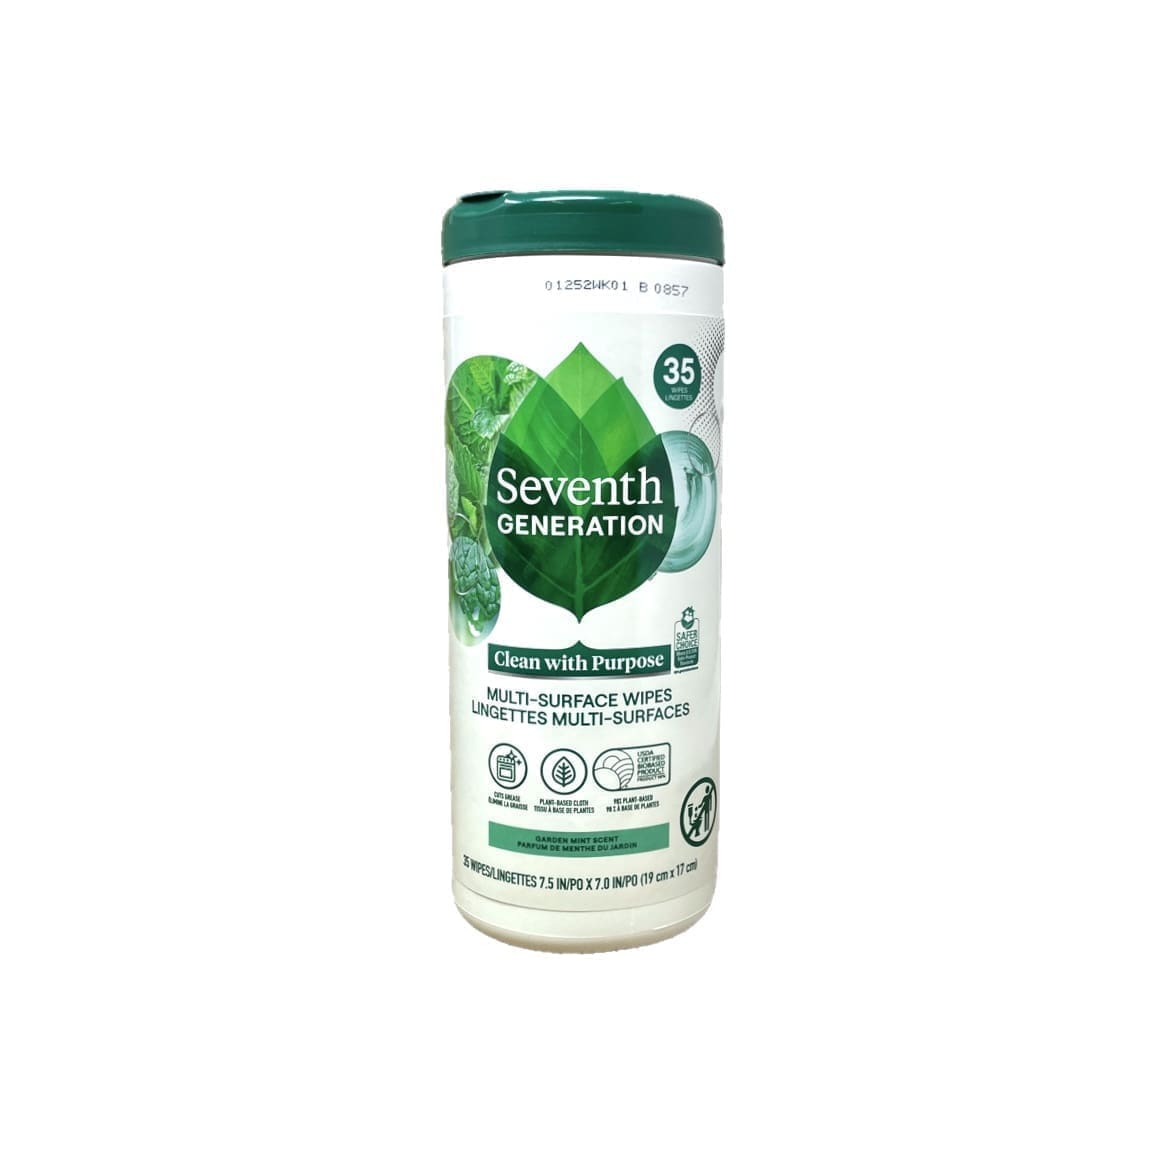 Seventh Generation Multi-Surface Wipes Garden Mint Scent (35 wipes)